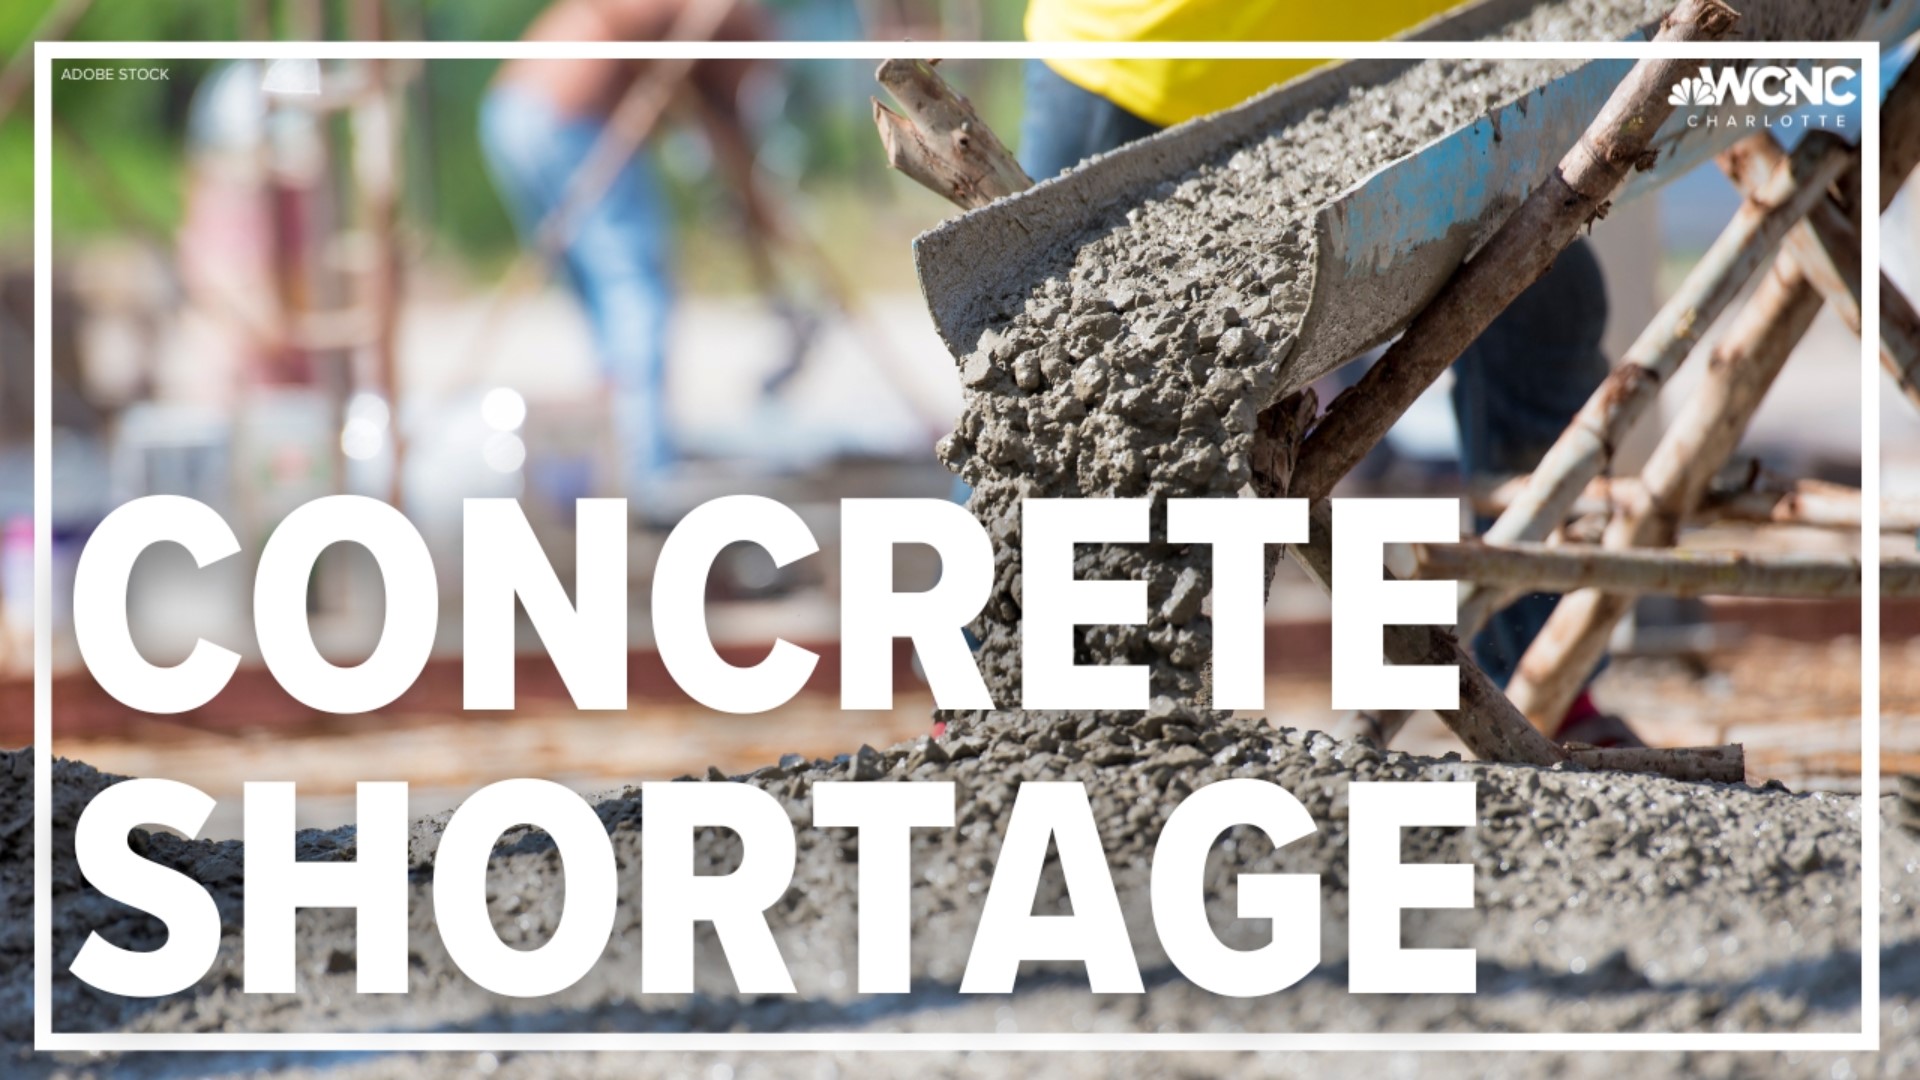 The shortage could not only impact major construction projects but could also create issues if you're looking to get work done on your home.